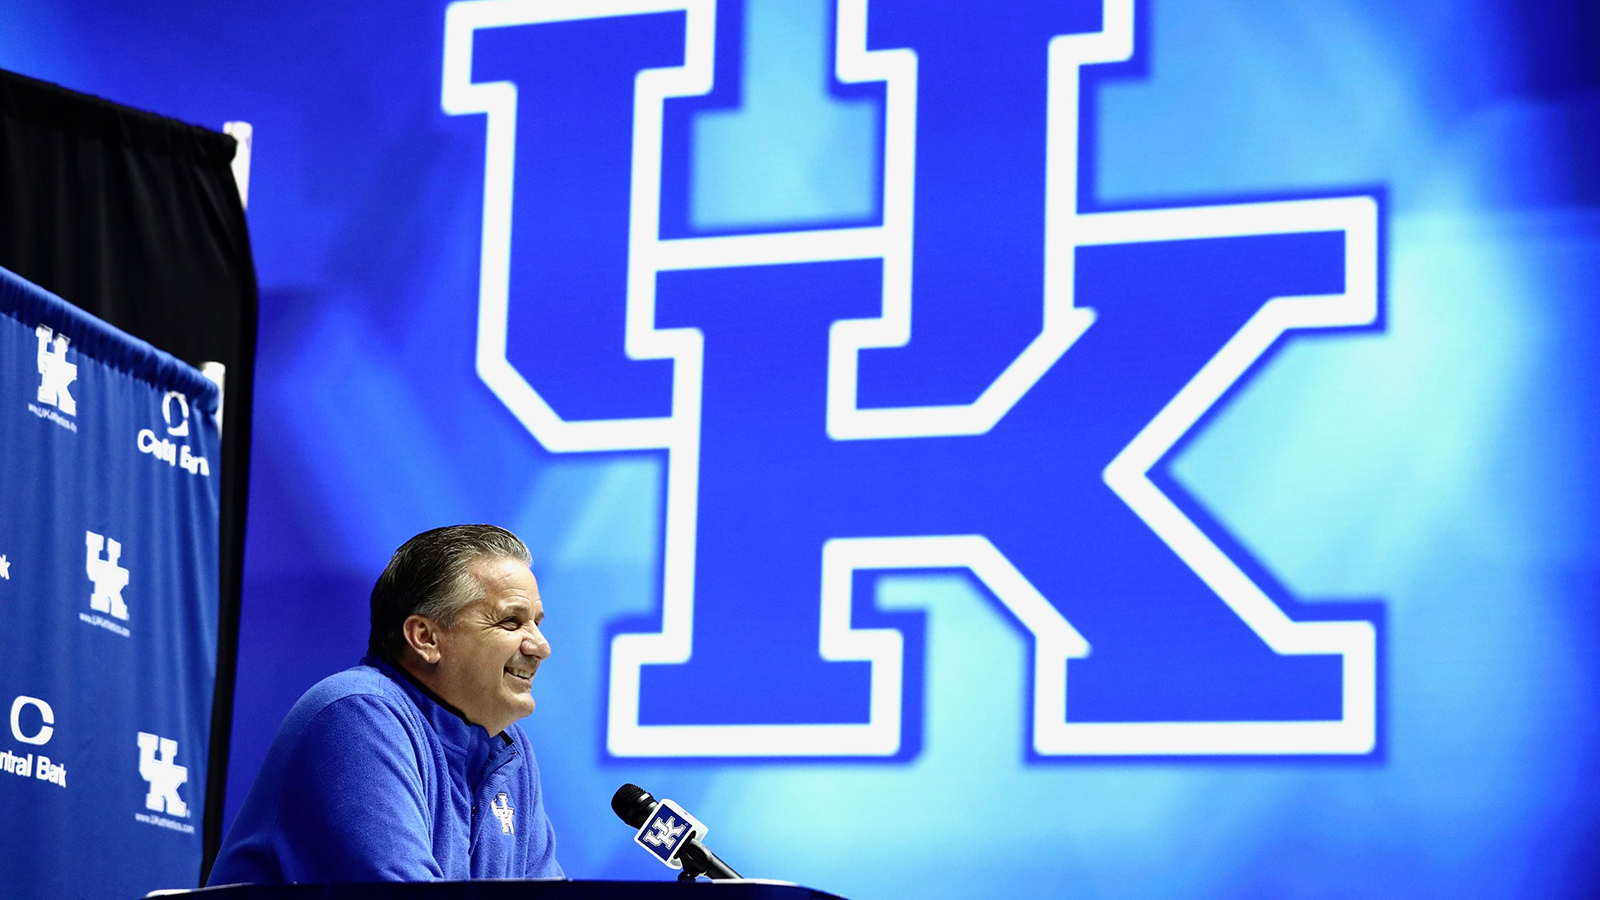 Calipari Looking to Exploit Team's Depth, Experience and Speed